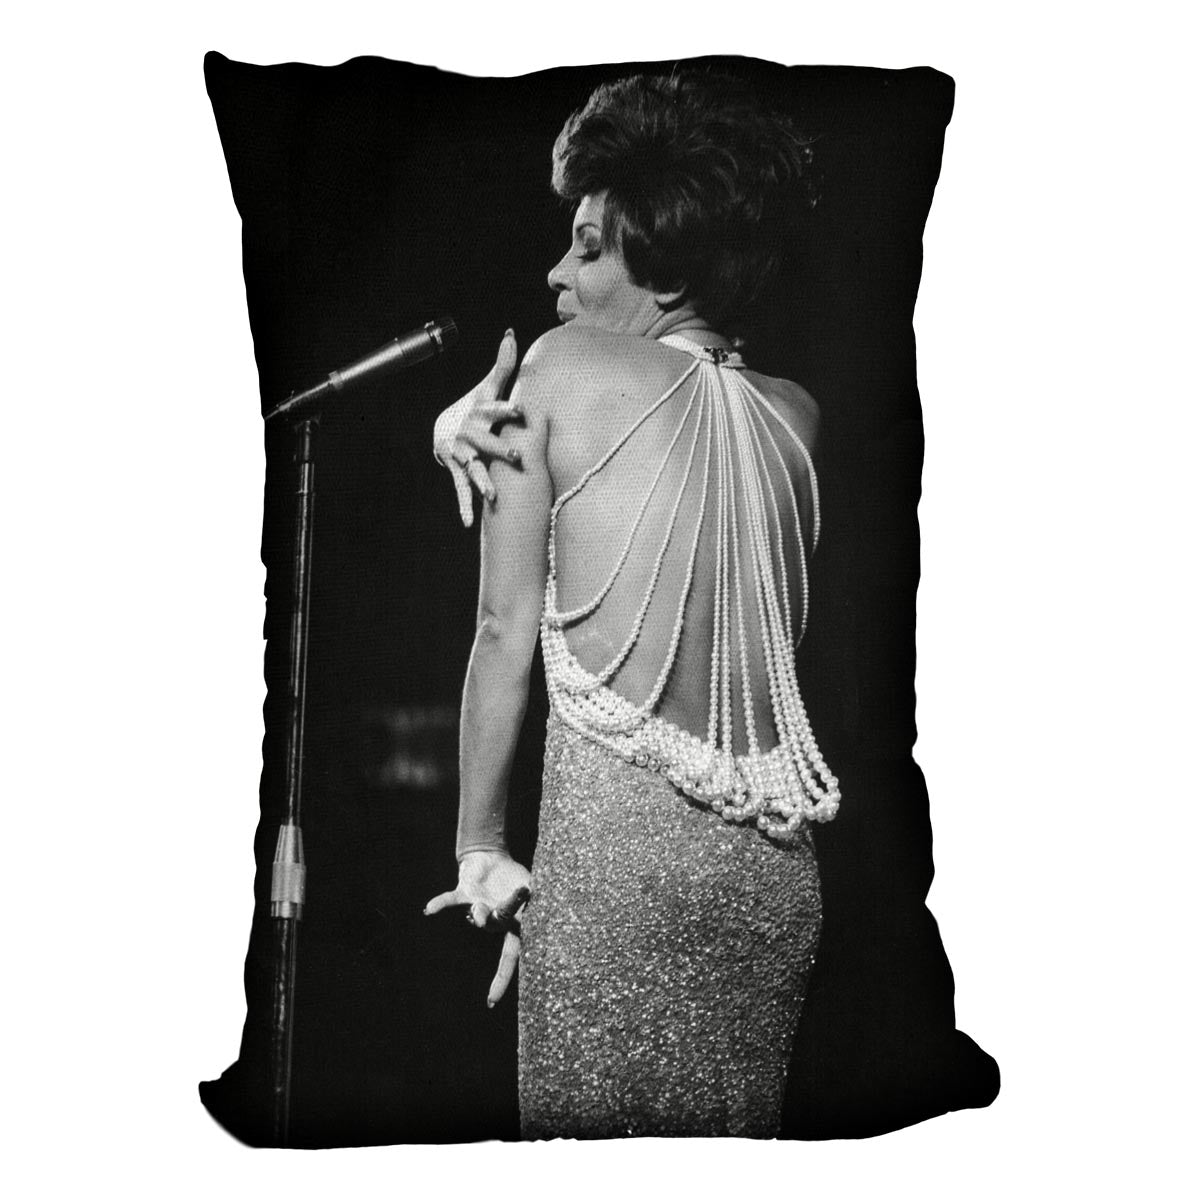 Shirley Bassey on stage Cushion